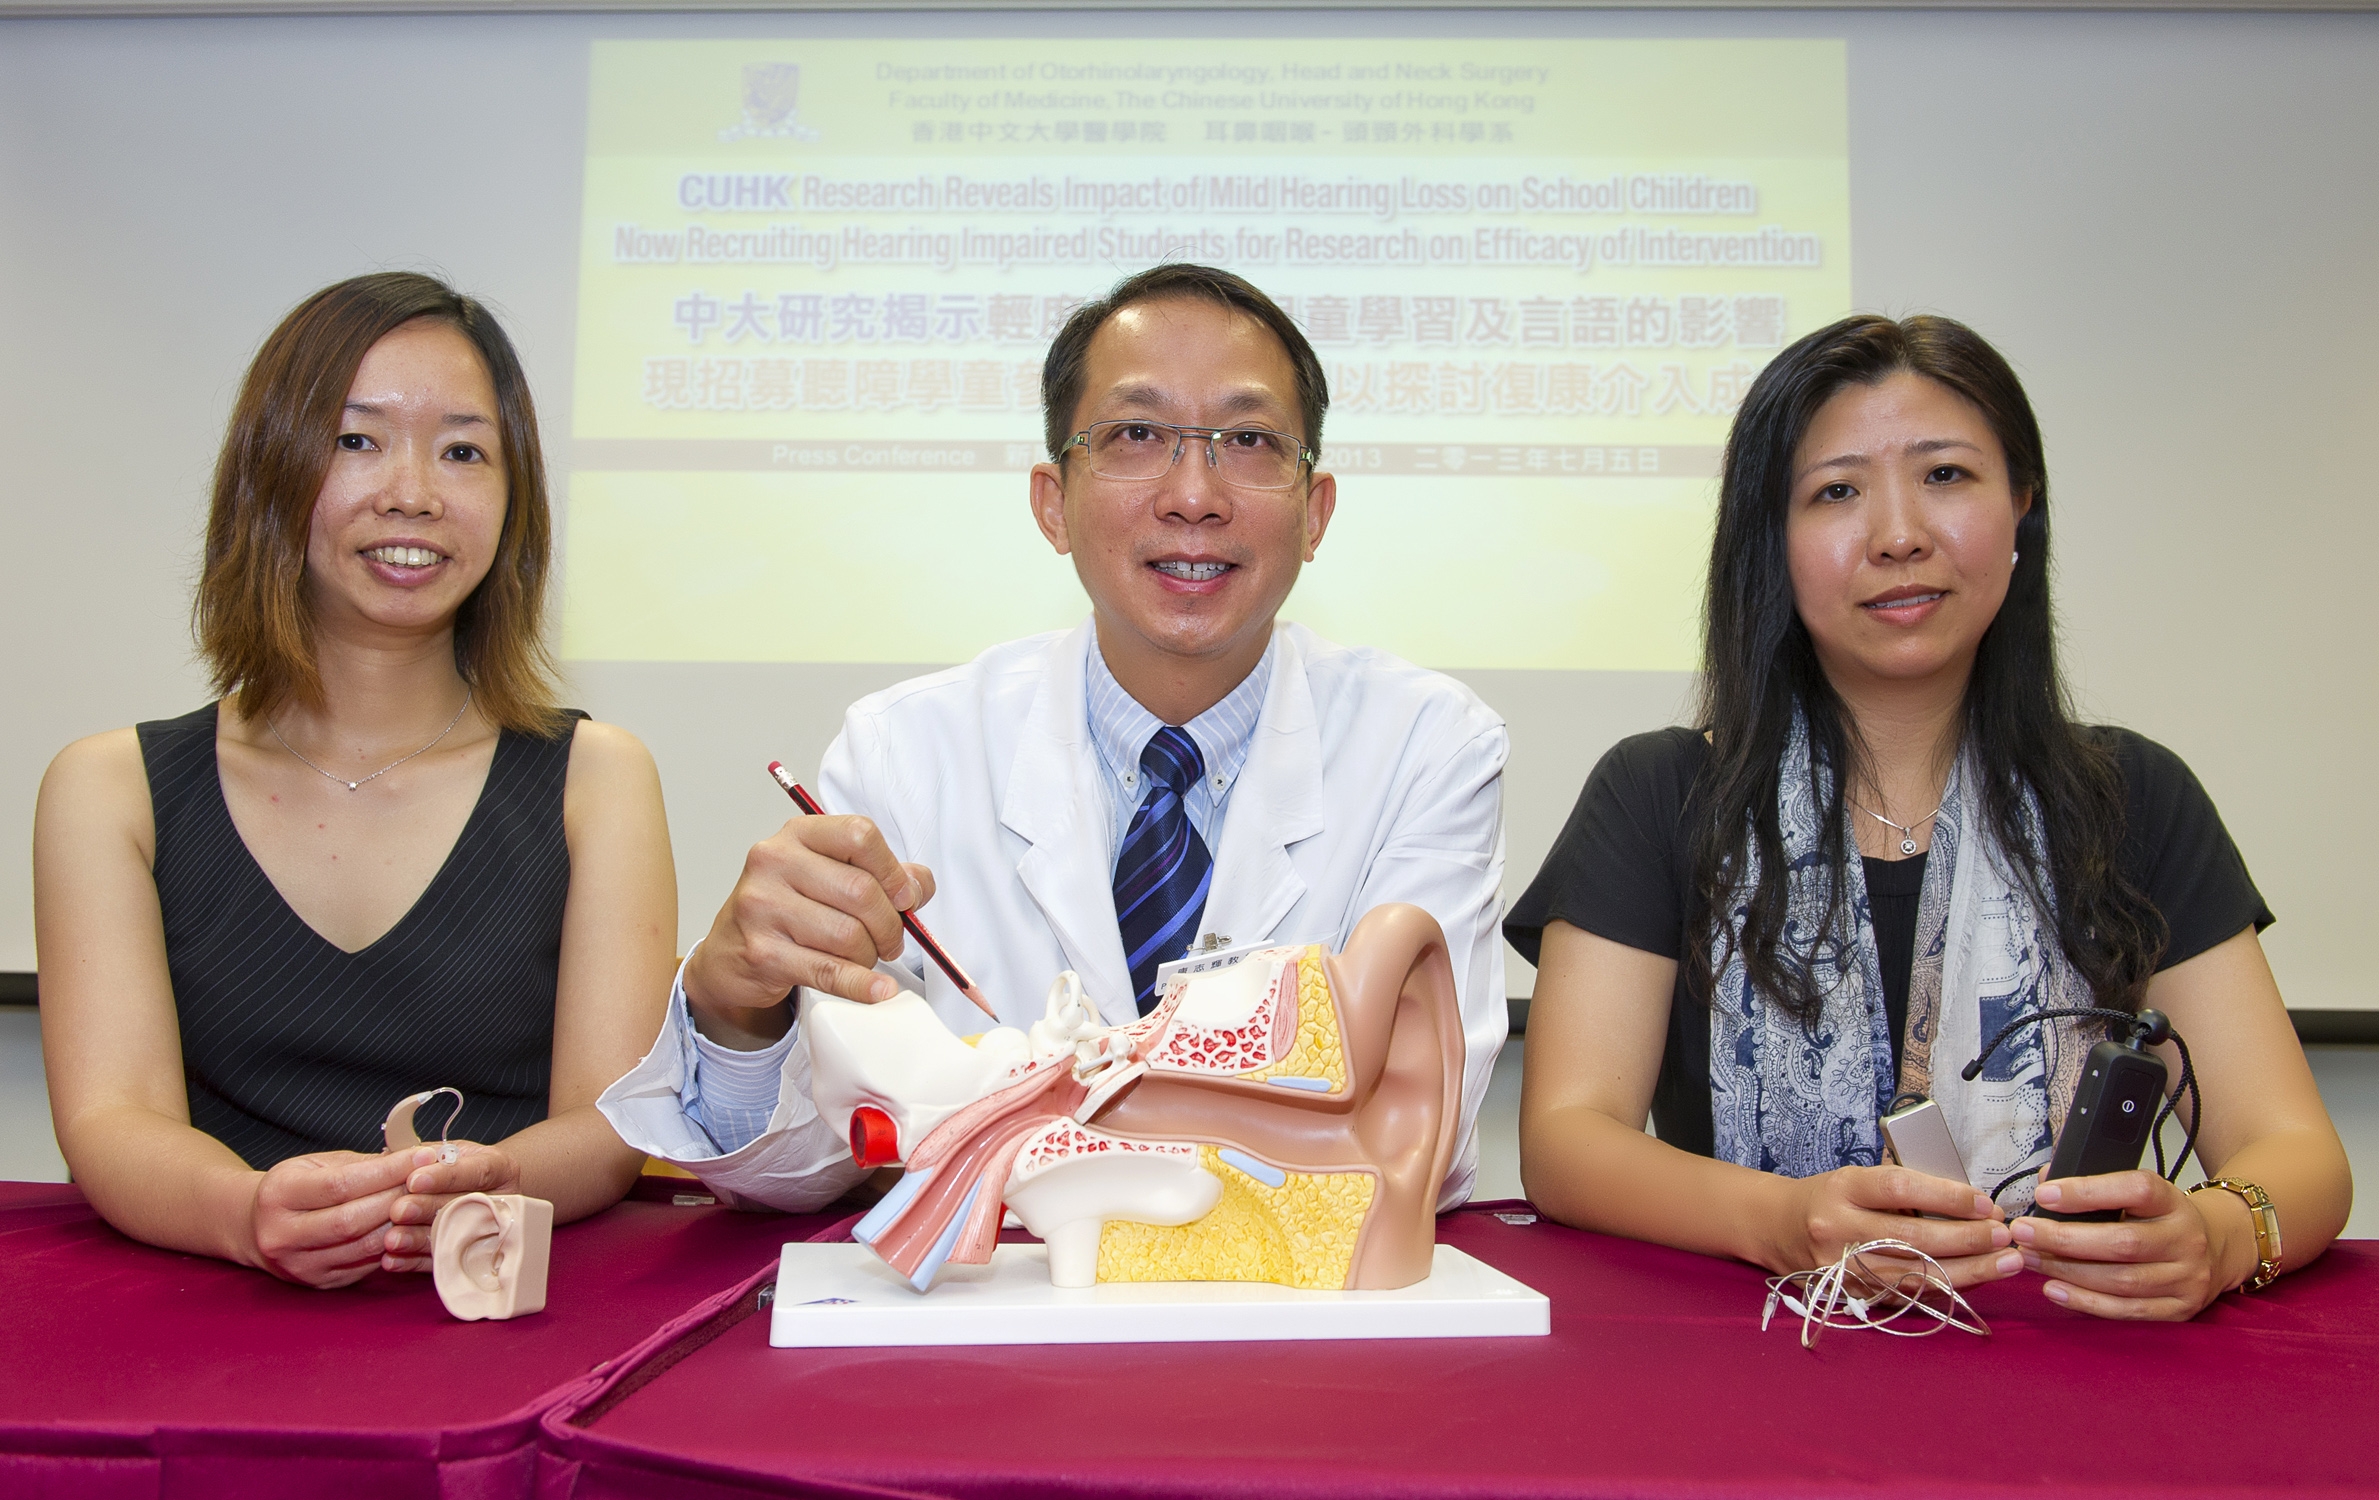 (from left) Miss Iris NG, Professor Michael TONG and Professor Anna KAM introduce the hearing system and hearing aid for the hearing impaired children